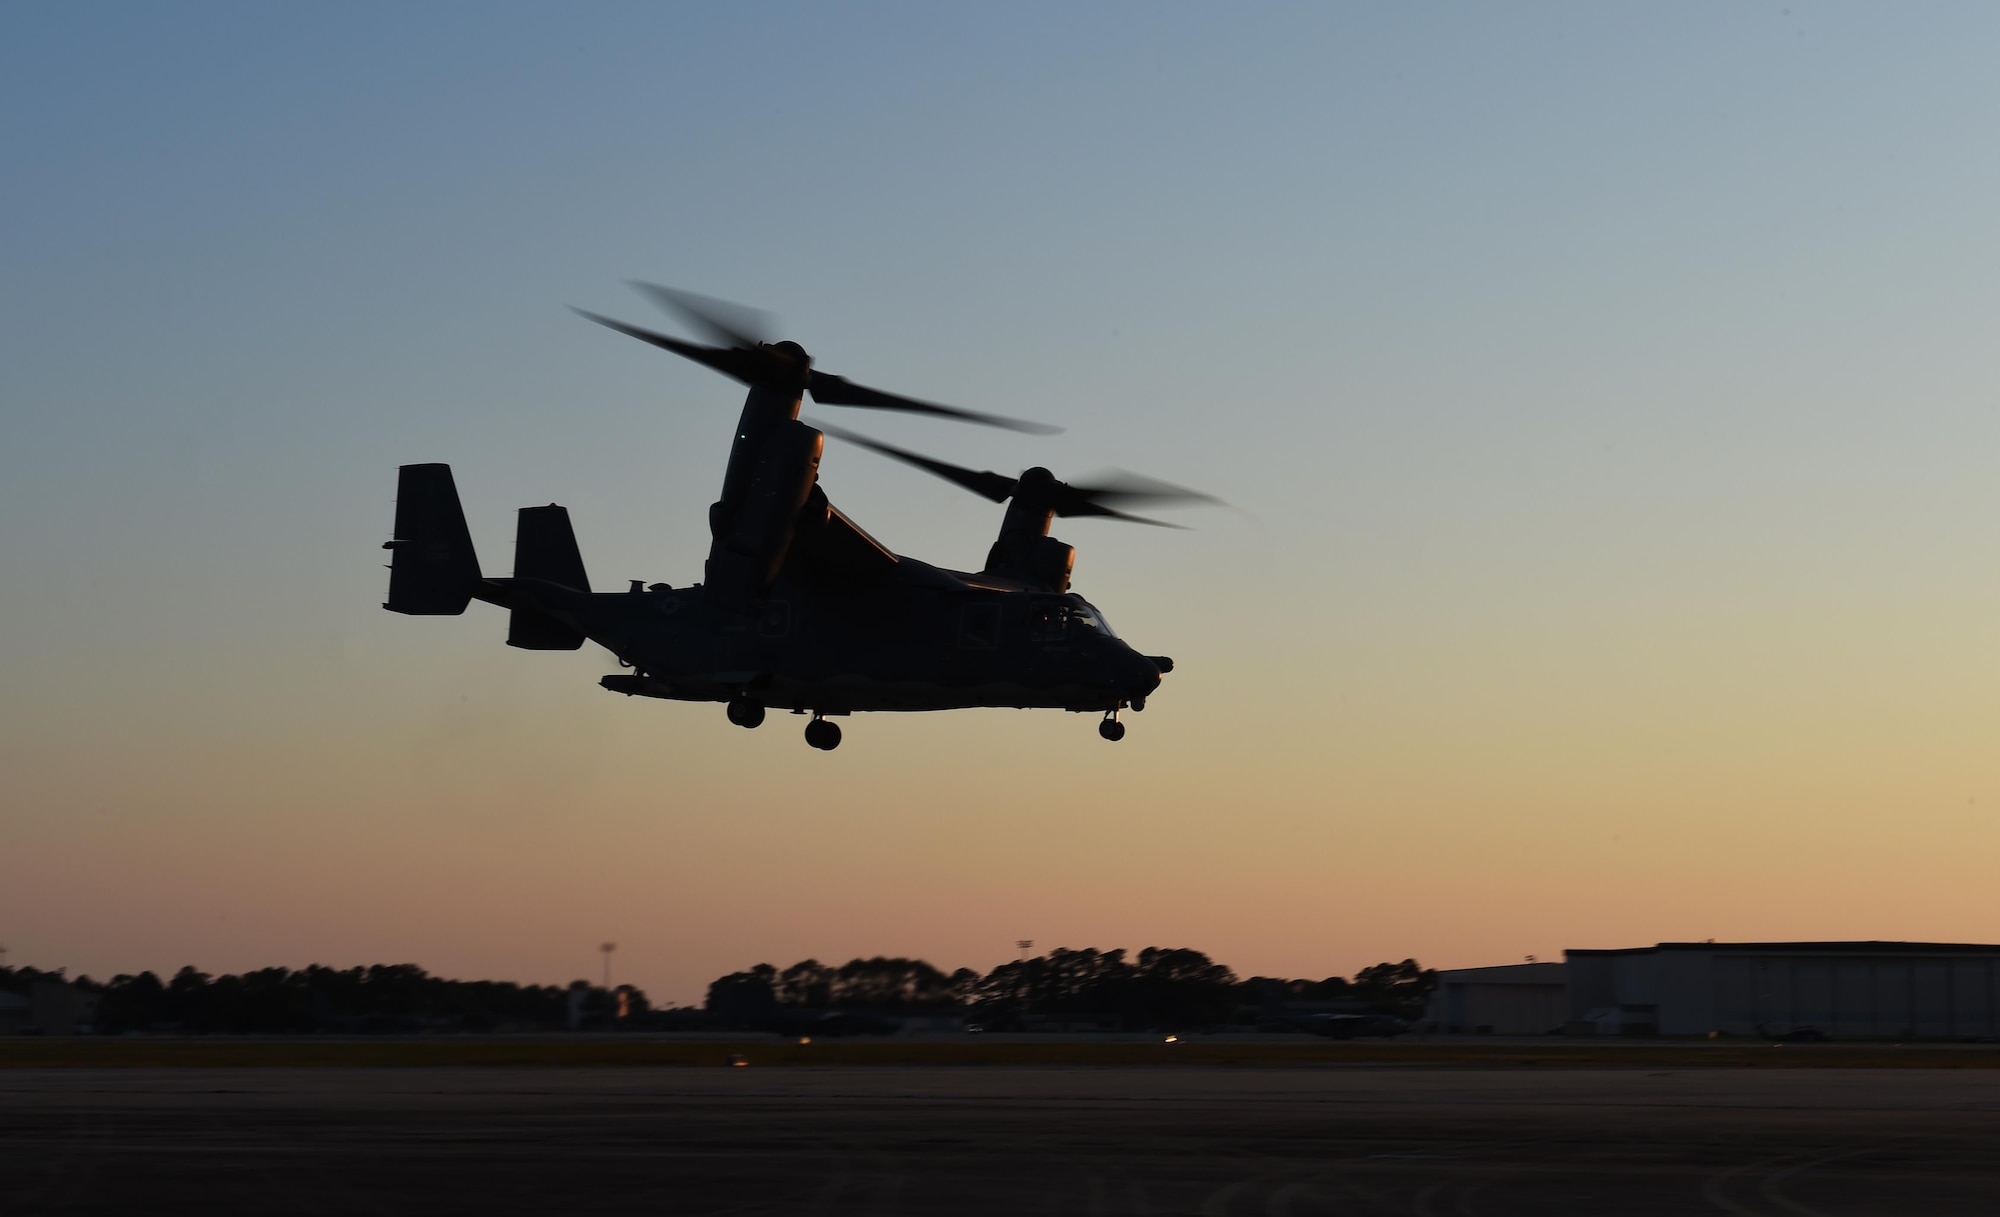 A U.S. Air Force CV-22 Osprey assigned to the 8th Special Operations Squadron hovers over the flightline at Hurlburt Field, Fla., May 7, 2016, during Emerald Warrior 16. Emerald Warrior is a U.S. Special Operations Command-sponsored mission rehearsal exercise during which joint special operations forces train to respond to real and emerging worldwide threats. (U.S. Air Force photo by Senior Airman Jasmonet Jackson)